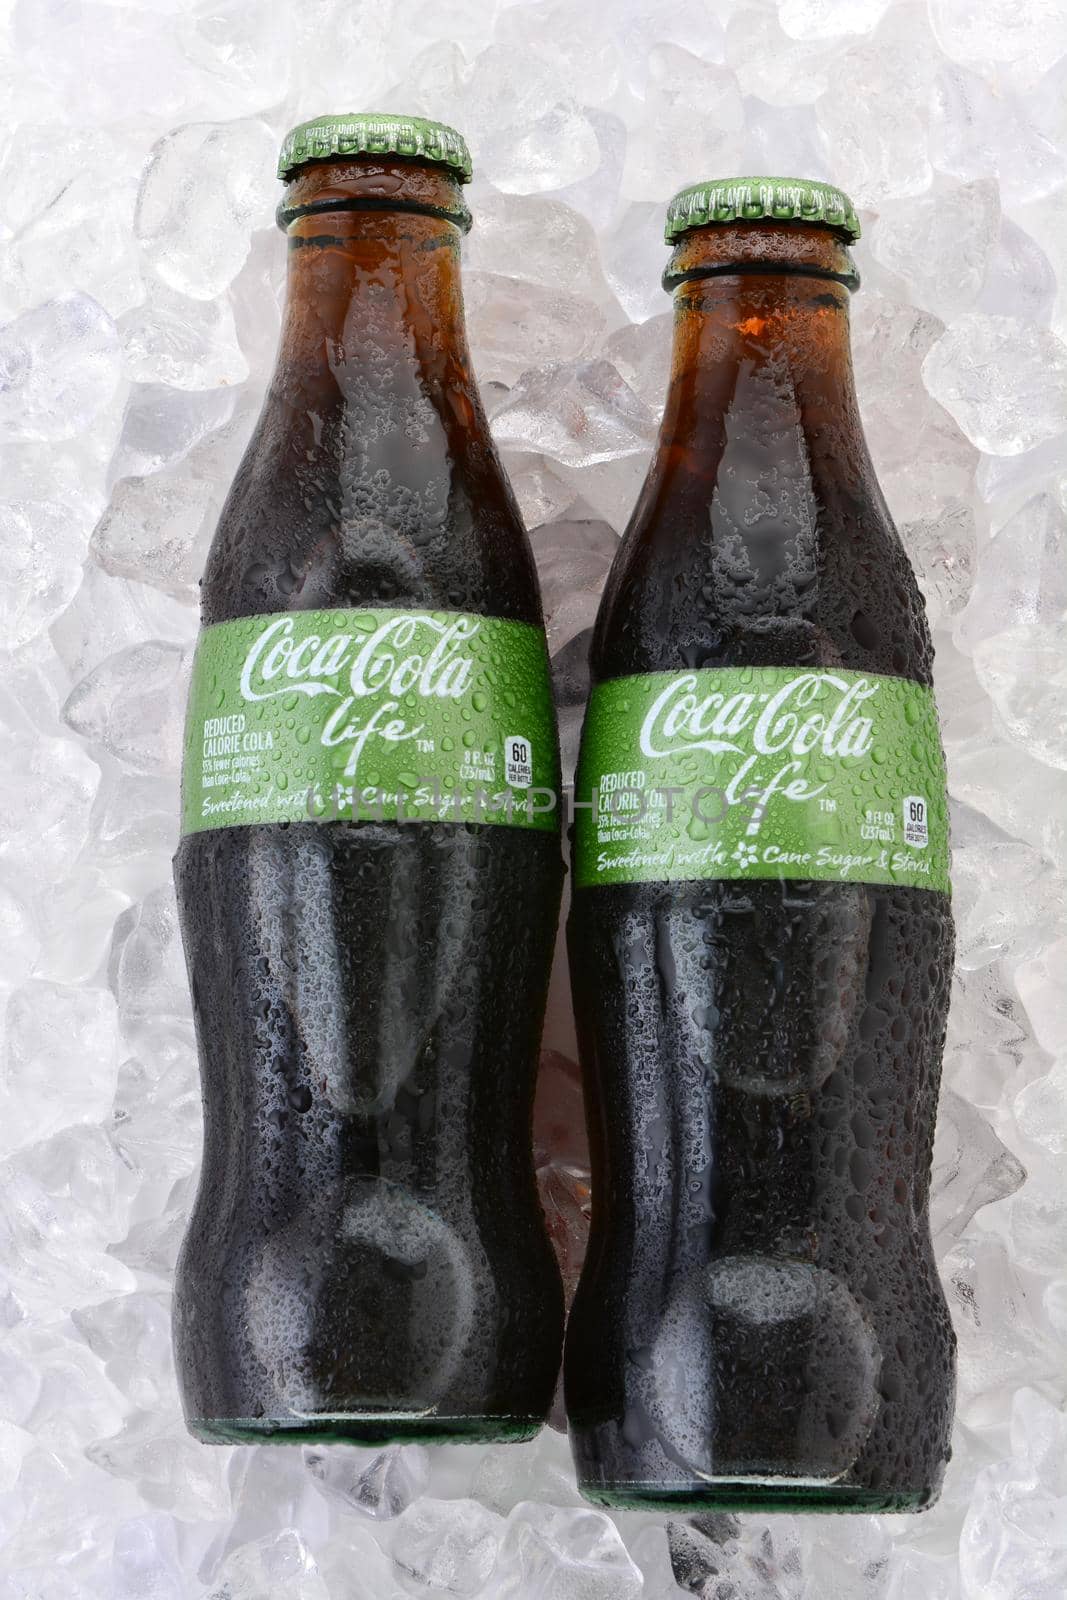 IRVINE, CA - FEBRUARY 15, 2015: Coca-Cola Life bottles on ice. A reduced calorie soft drink sweetened with cane sugar and Stevia, containing 60% of the calories of Classic Coke.